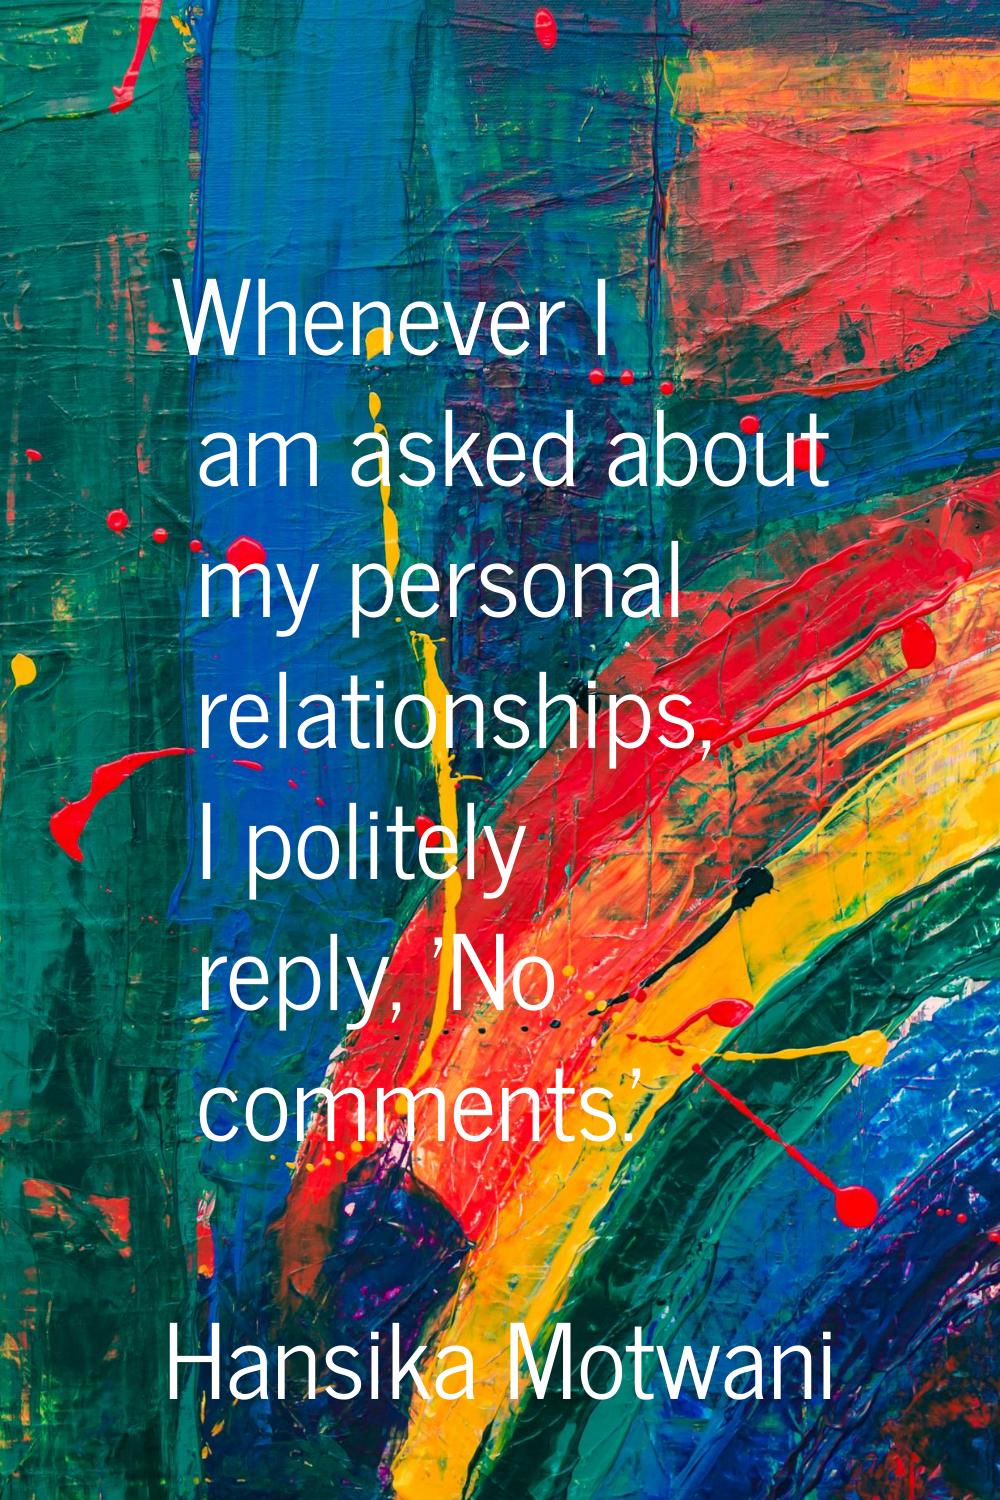 Whenever I am asked about my personal relationships, I politely reply, 'No comments.'